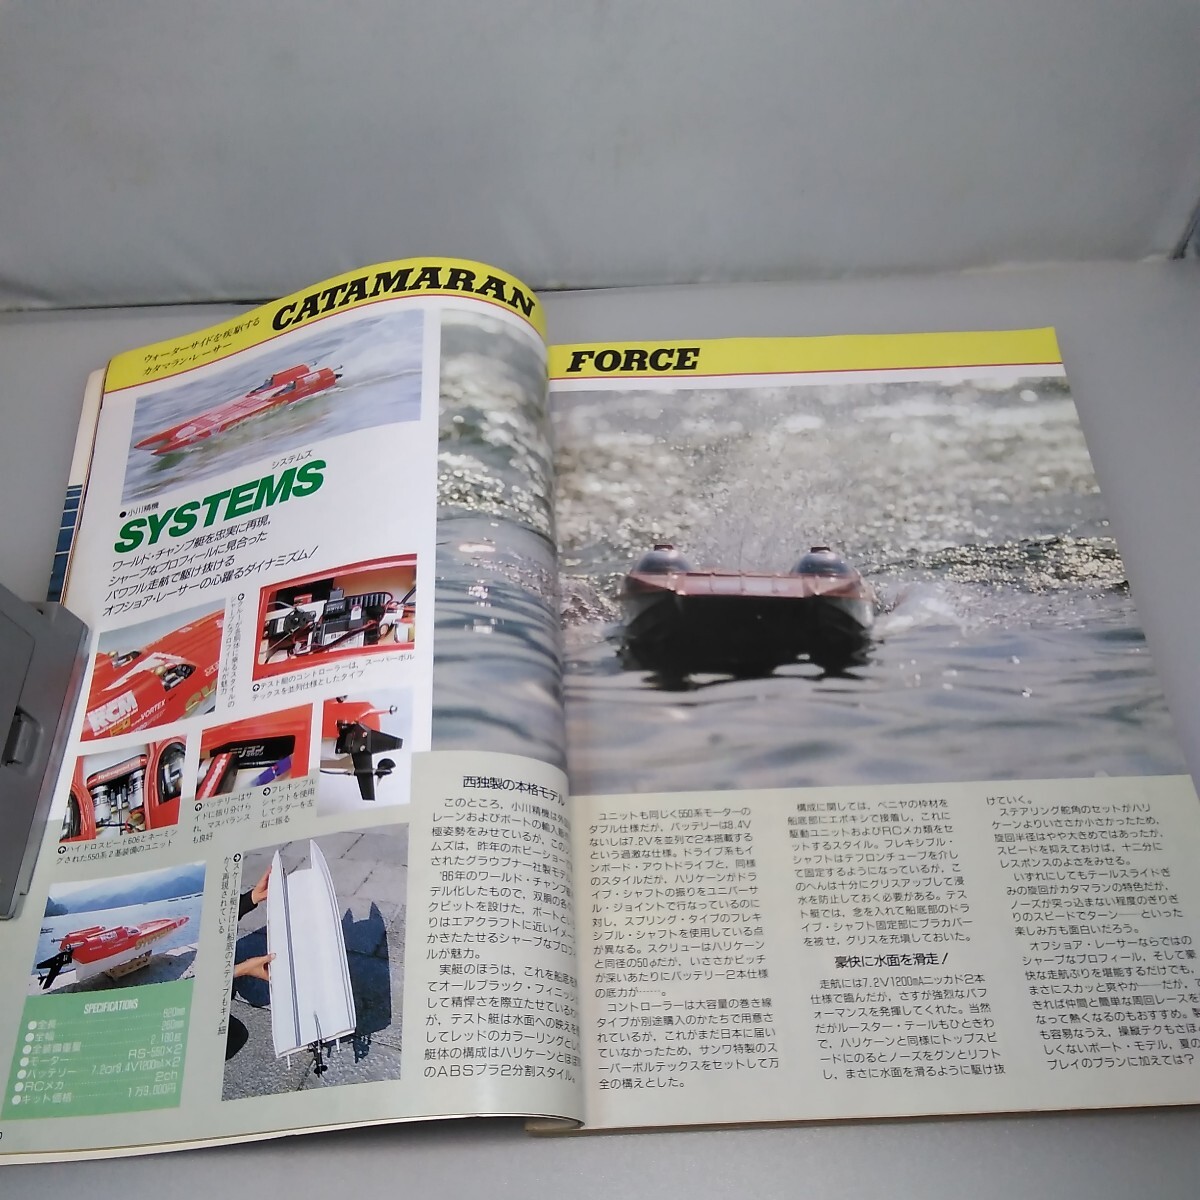 [ that time thing ] radio-controller magazine *1990 year 4 month number no. 13 volume no. 4 number * Heisei era 2 year 4 month issue *RCmagazine* Yaesu publish * free shipping * same day shipping * rare * the whole exhibiting 